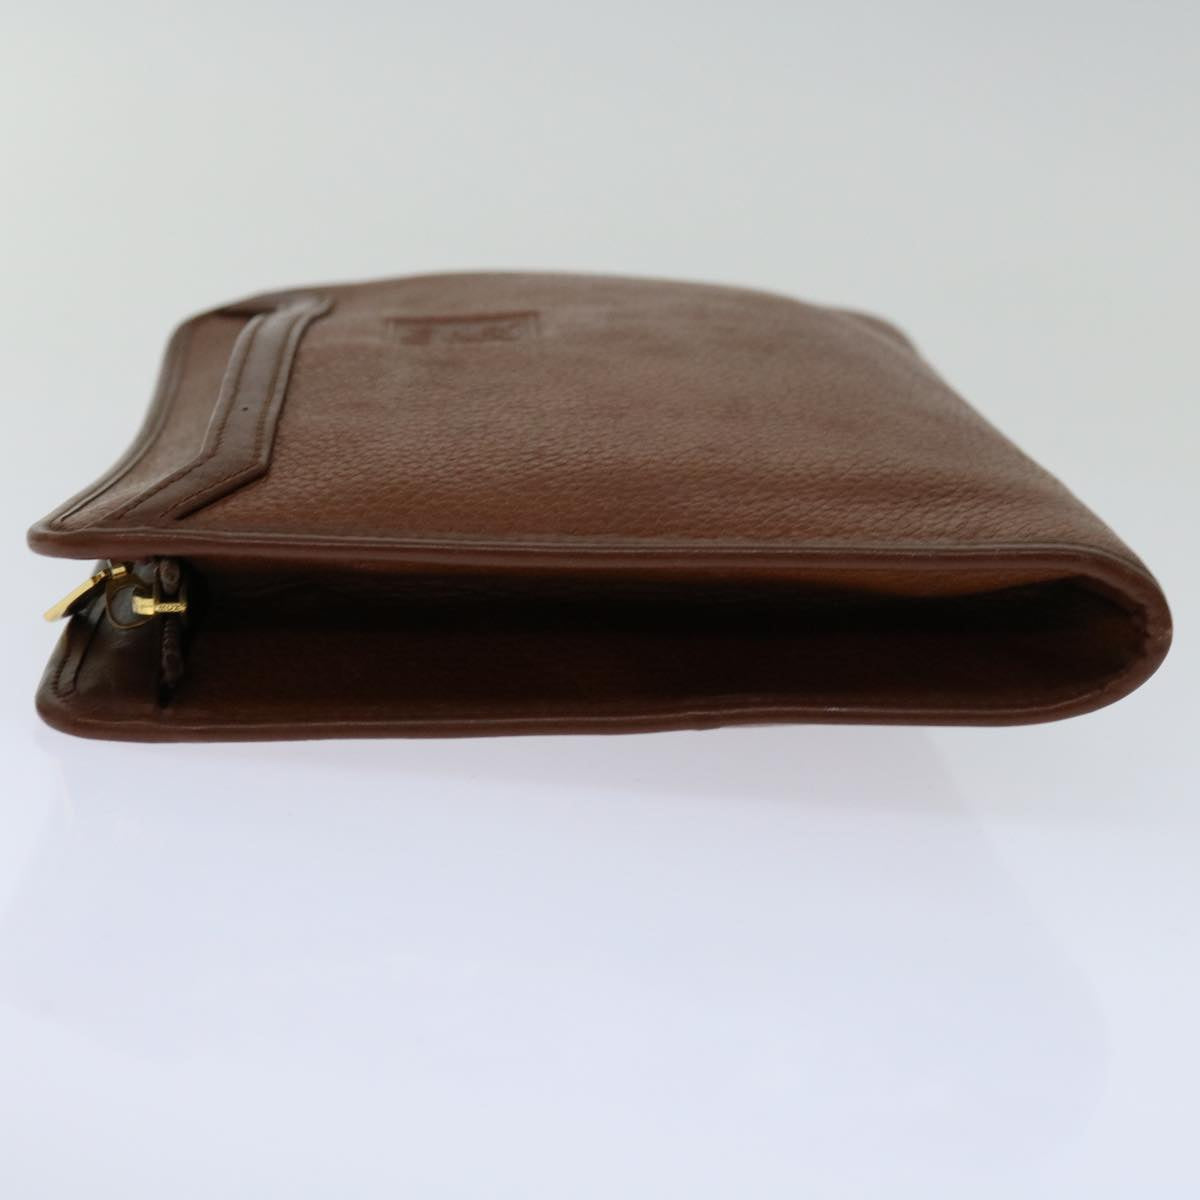 Burberrys Clutch Bag Leather Brown Auth bs12585